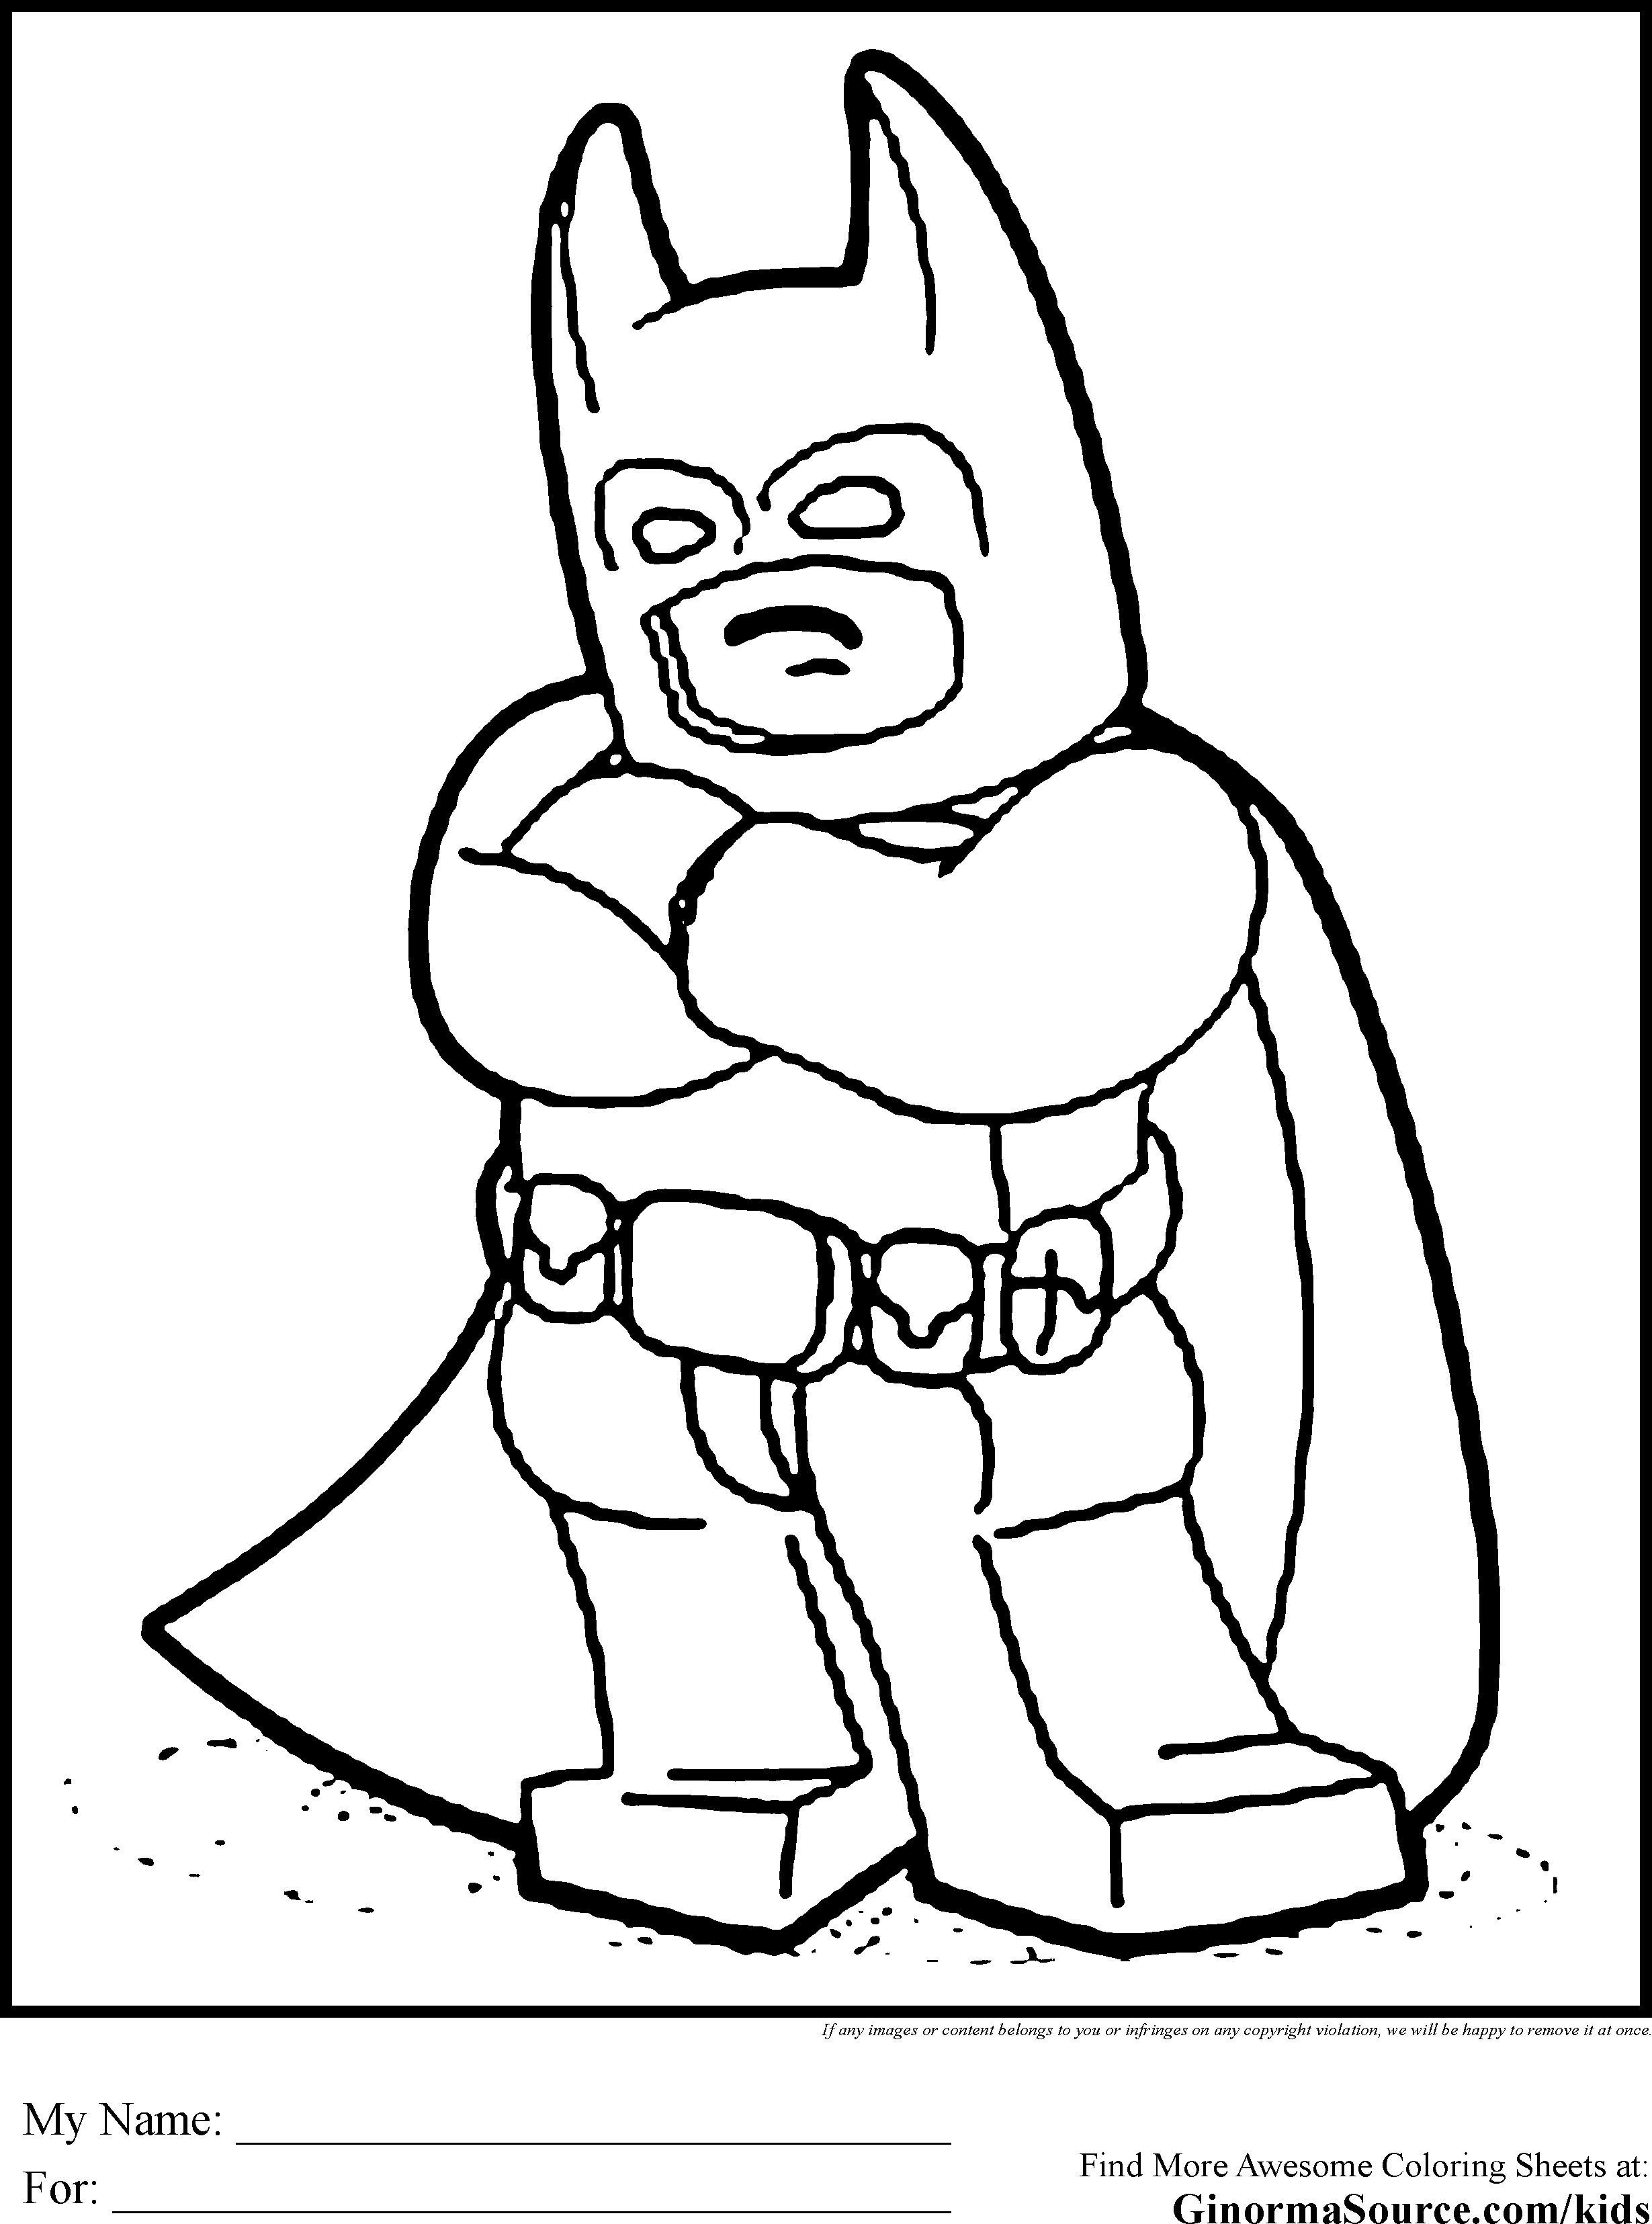 Batman Penguin Coloring Pages To Print - Coloring Pages For All Ages